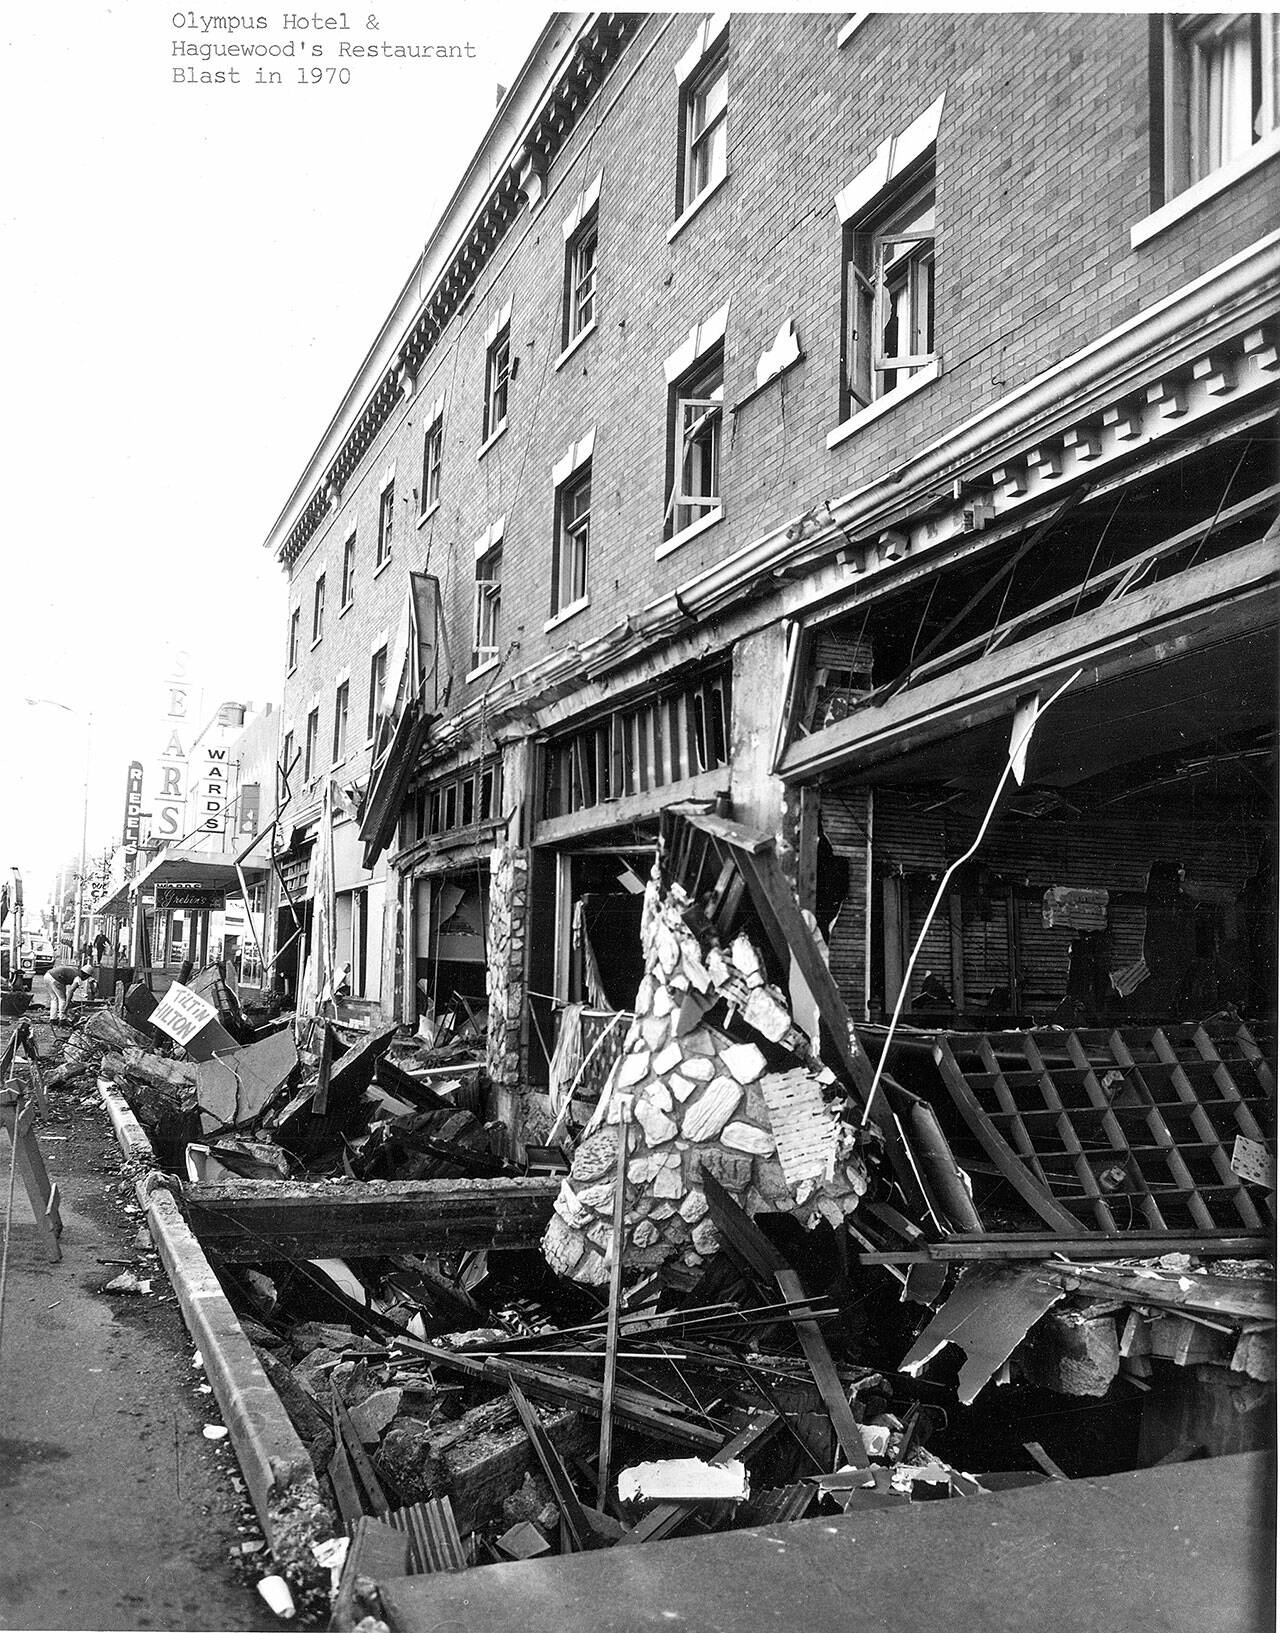 The damage caused by the blast to Haguewood’s Restaurant and Olympus Motel. (Courtesy of the North Olympic History Center)